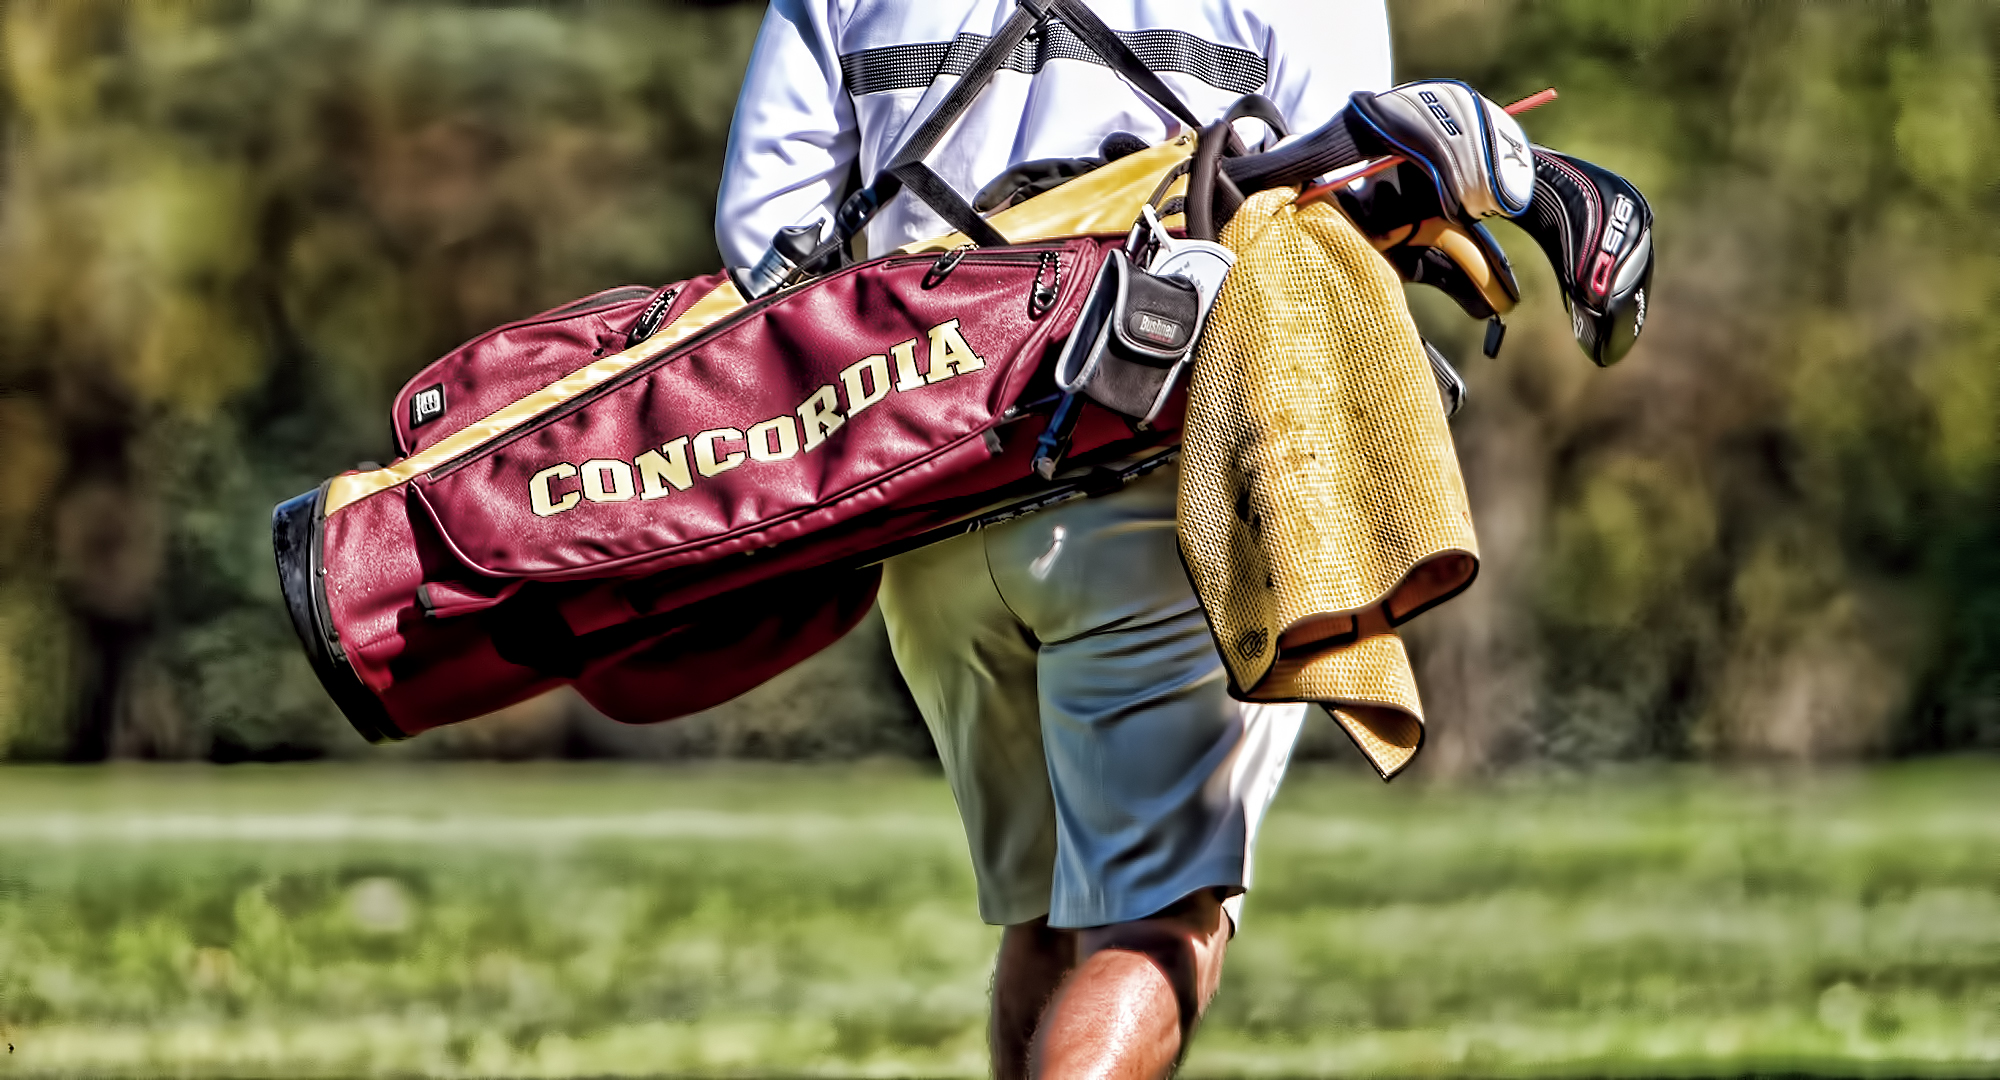 Concordia shot a 2-round total of 616 and finished fifth at the season-opening Augsburg Invite.